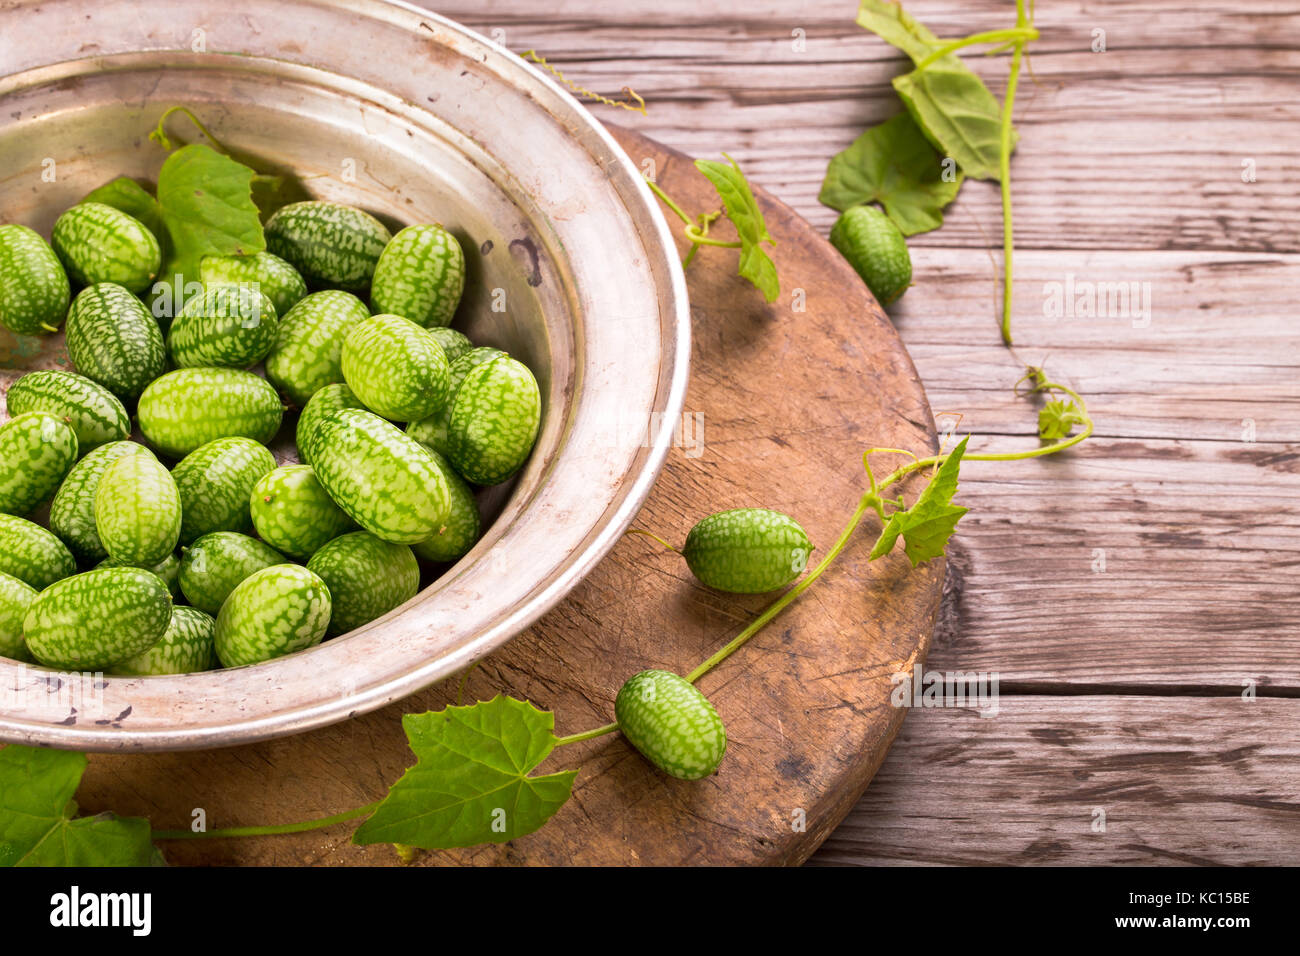 Cucamelons in plate Stock Photo